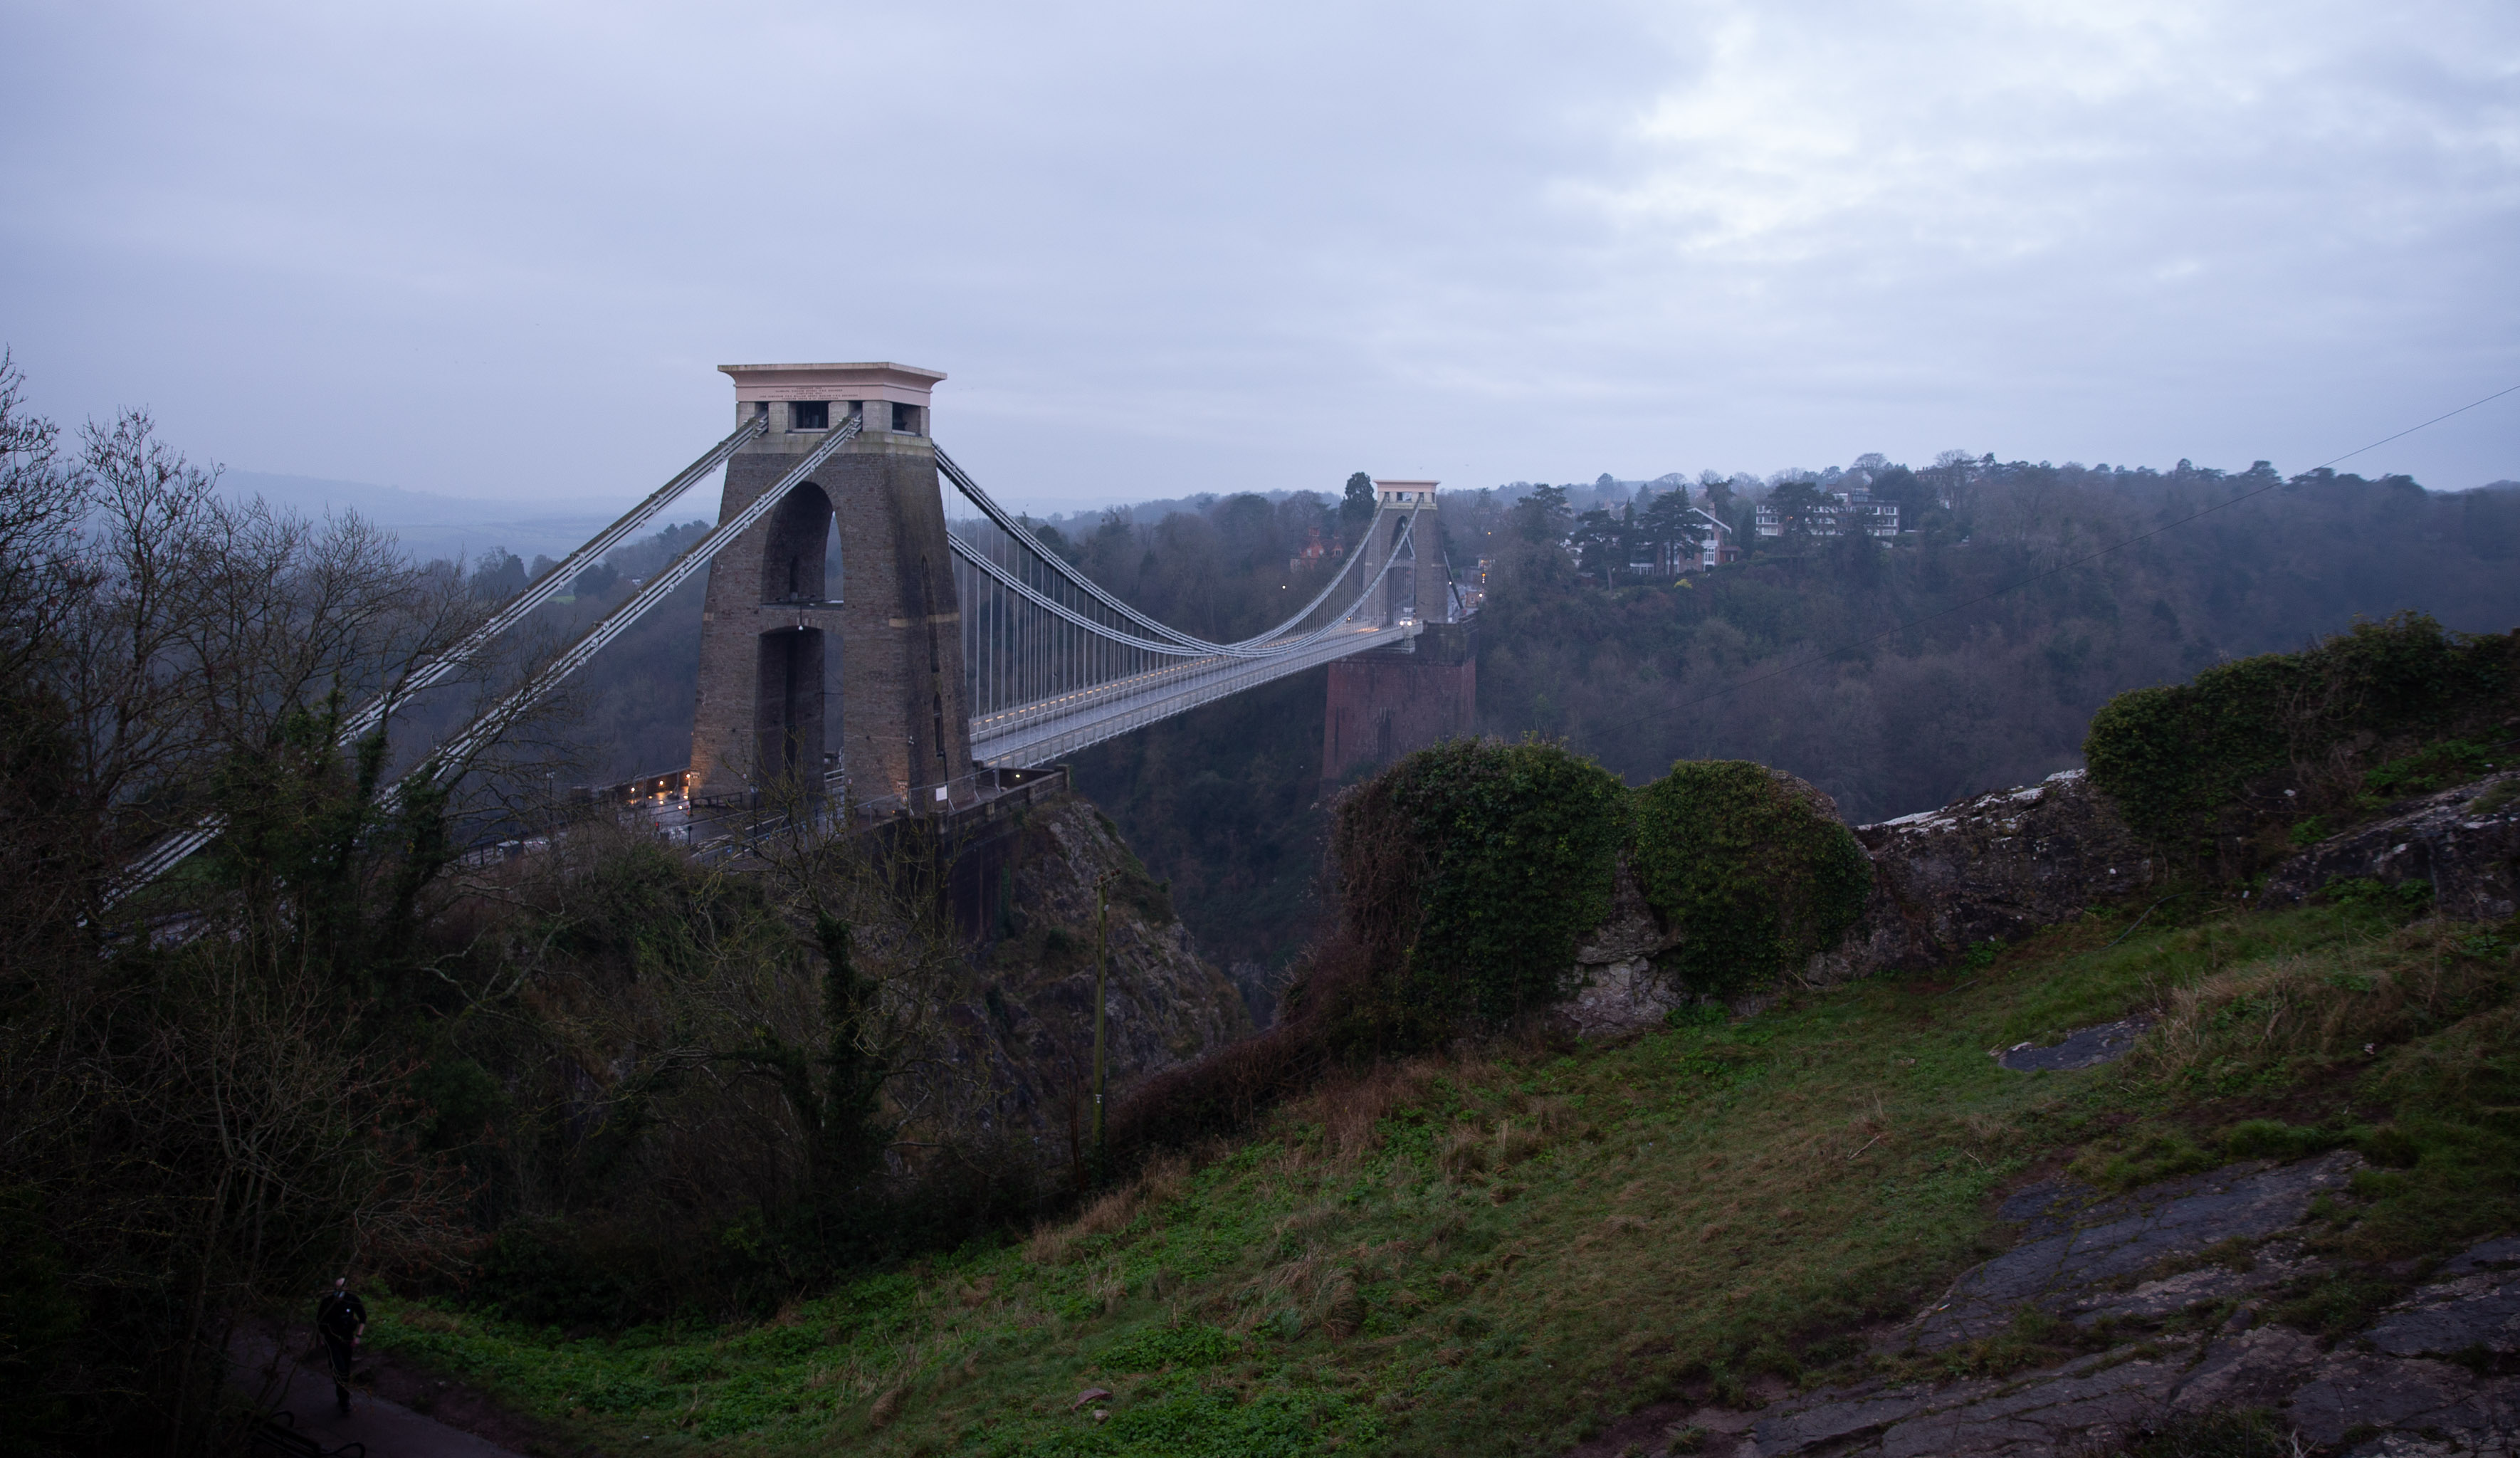 Further On
There are a few traditional vantage points for snapping the suspension bridge from Observatory Hill
